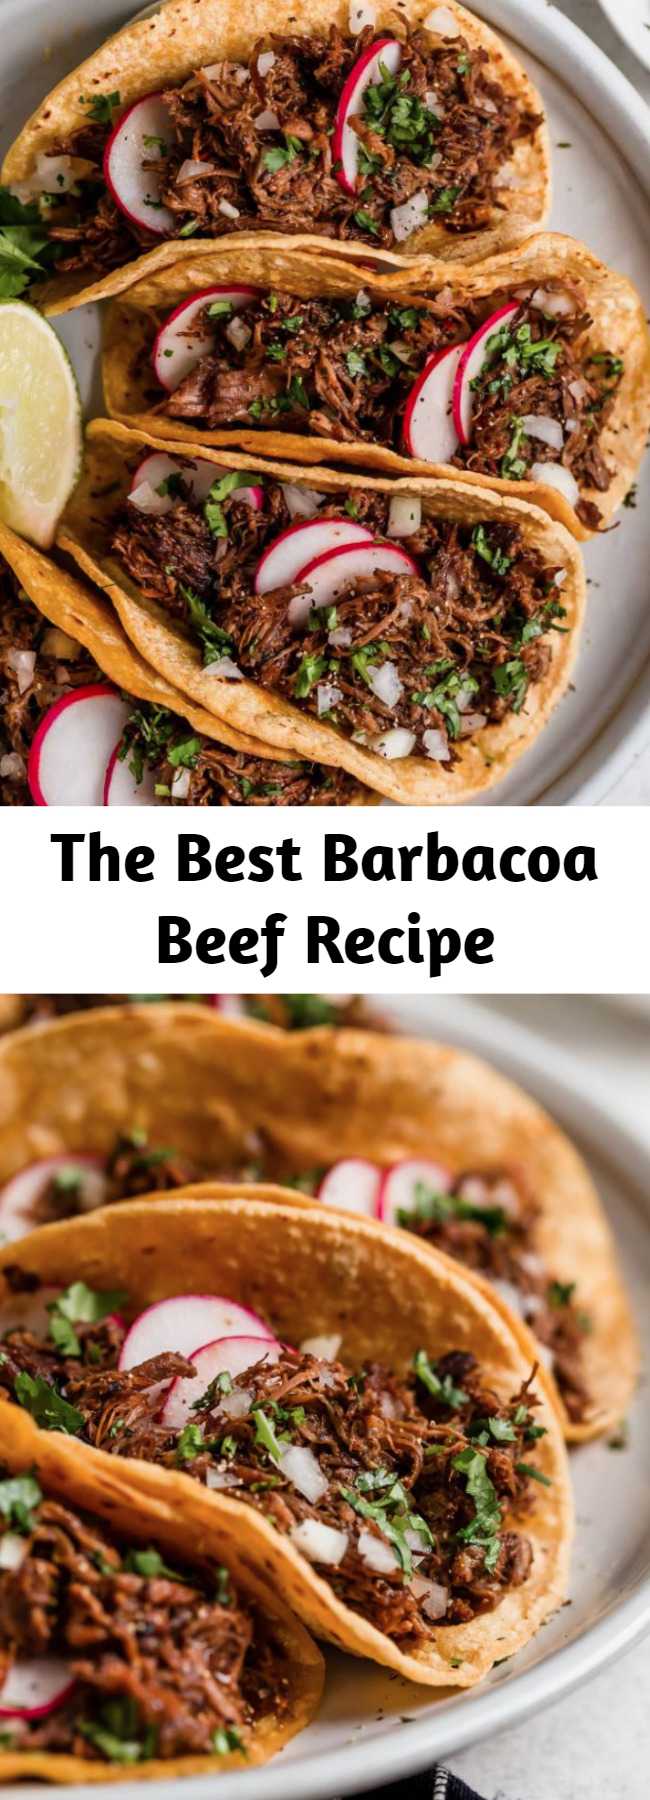 The Best Barbacoa Beef Recipe - This flavorful meat is deliciously seasoned and cooked low and slow until perfectly tender. Layer it in tortillas with all your favorite toppings for a crave-worthy dinner! #barbacoa #beef #tacos #mexicanrecipe